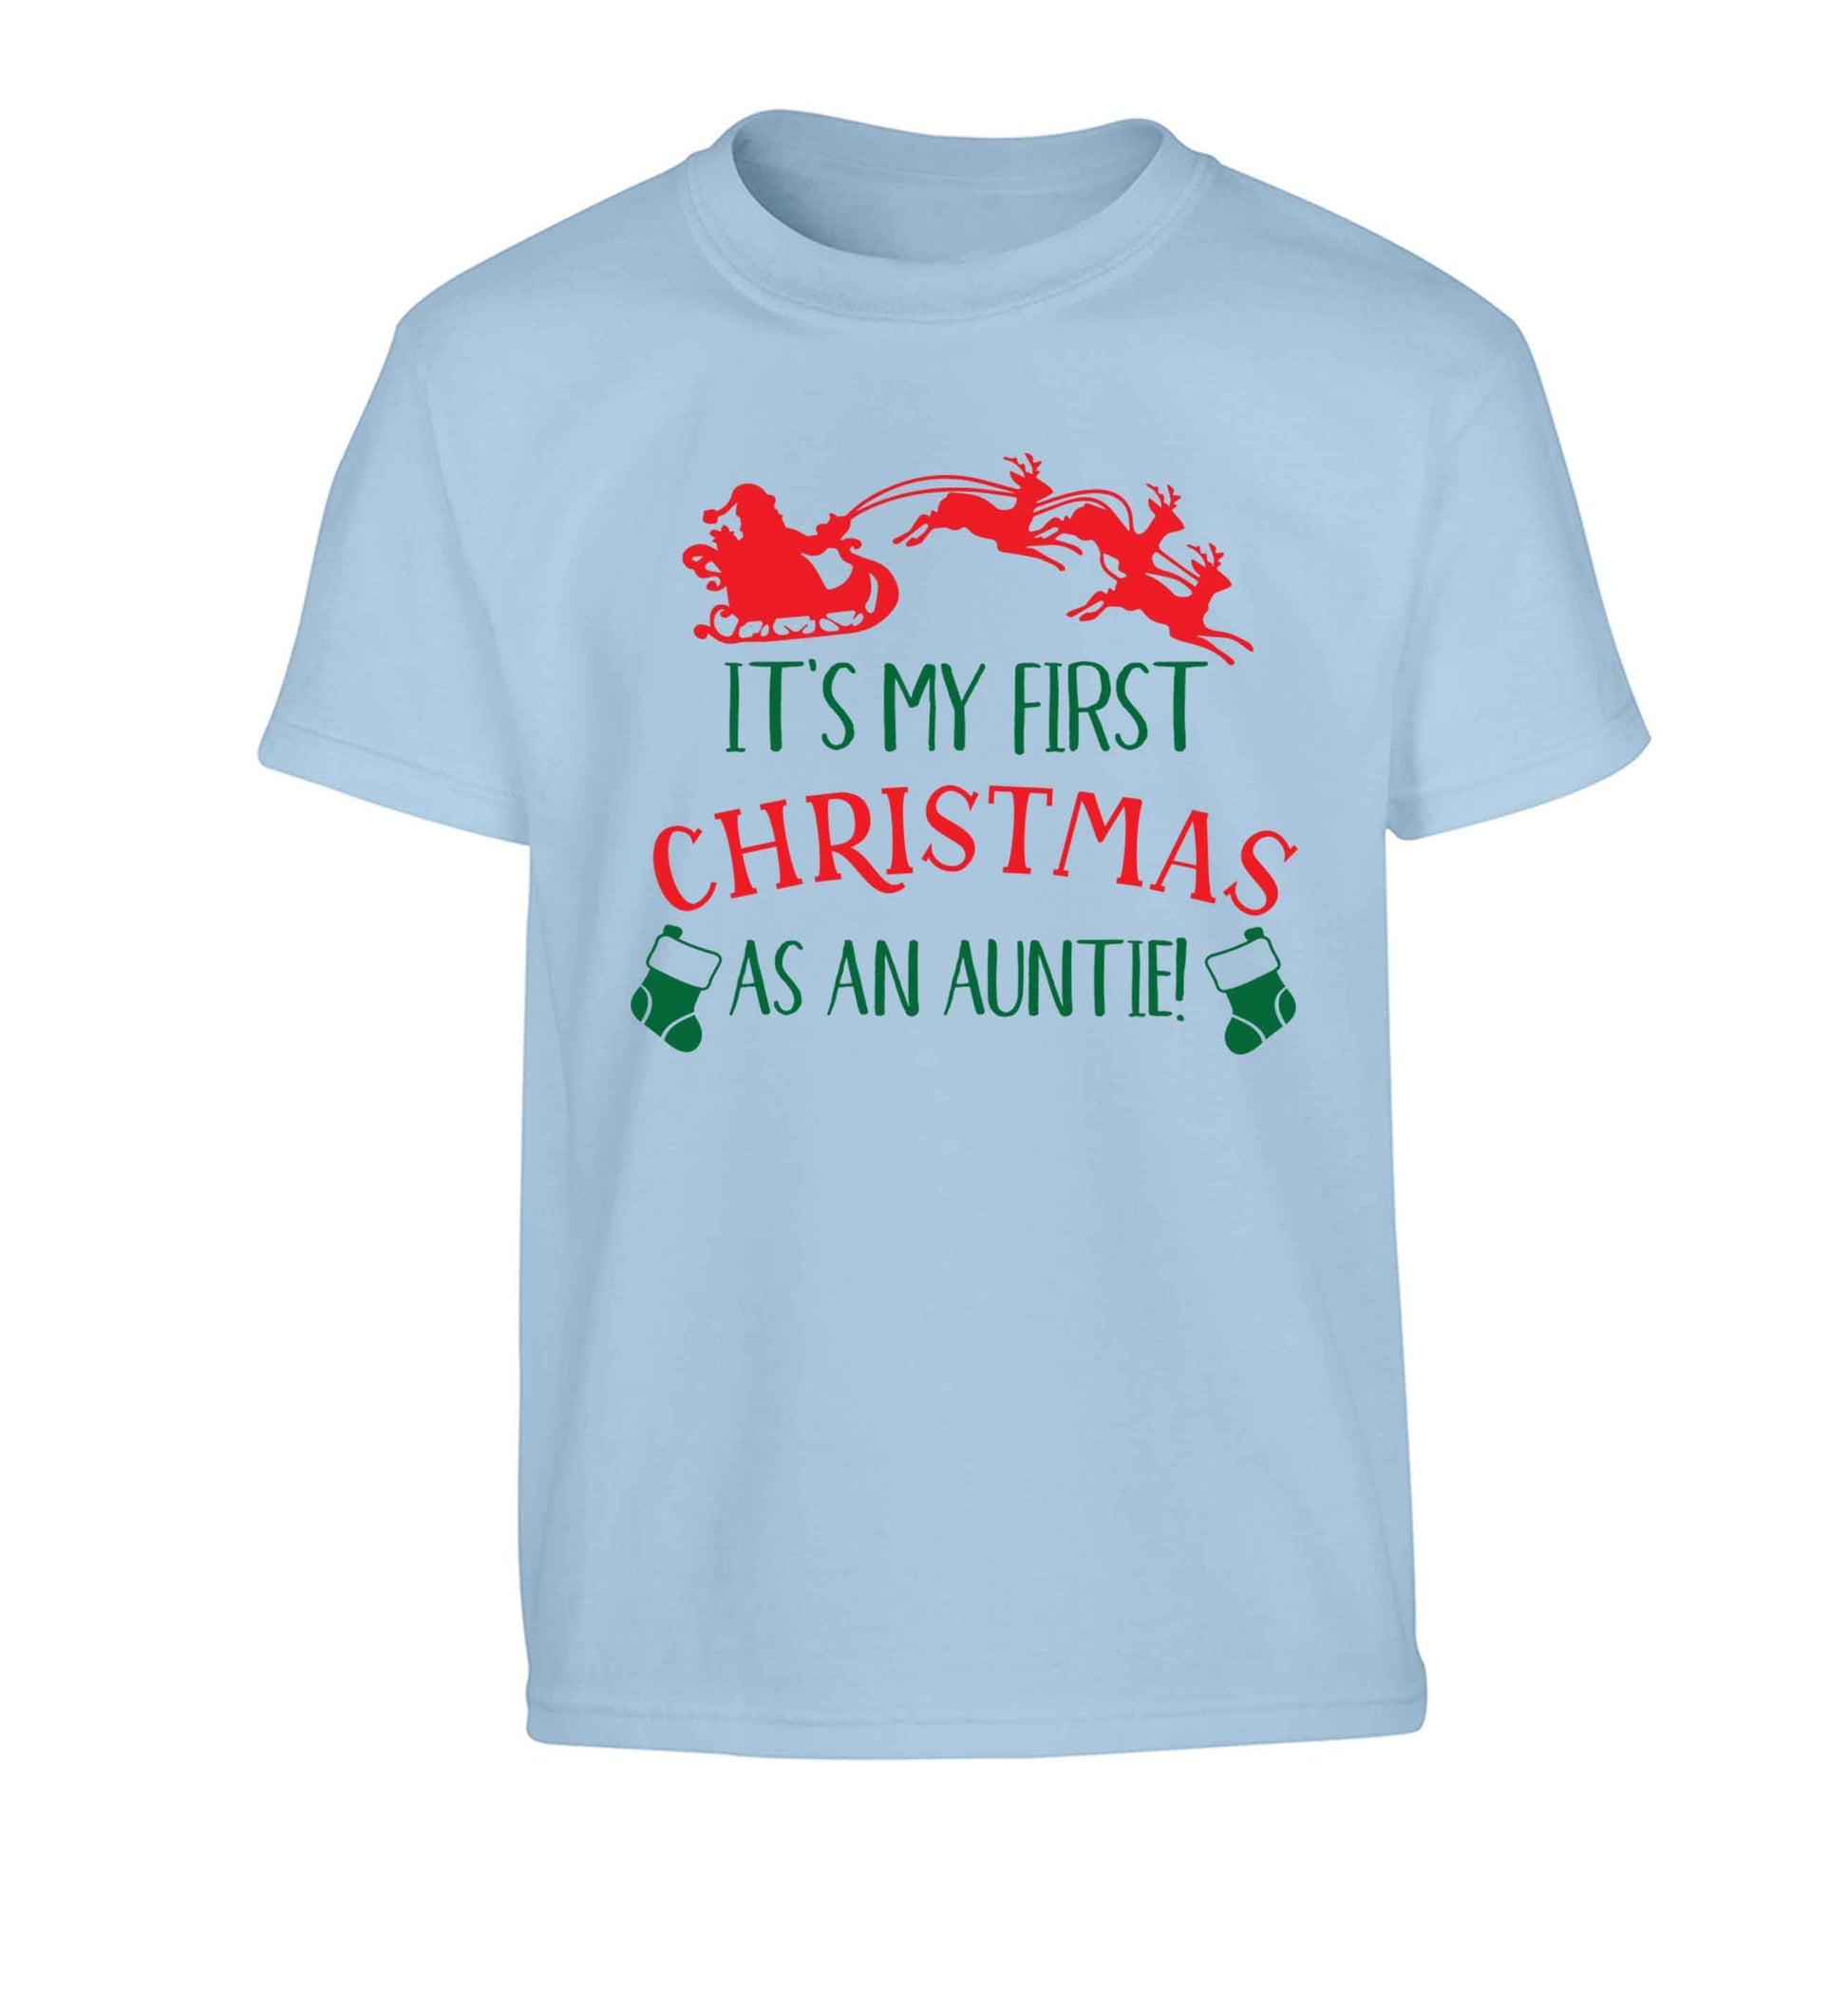 It's my first Christmas as an auntie! Children's light blue Tshirt 12-13 Years